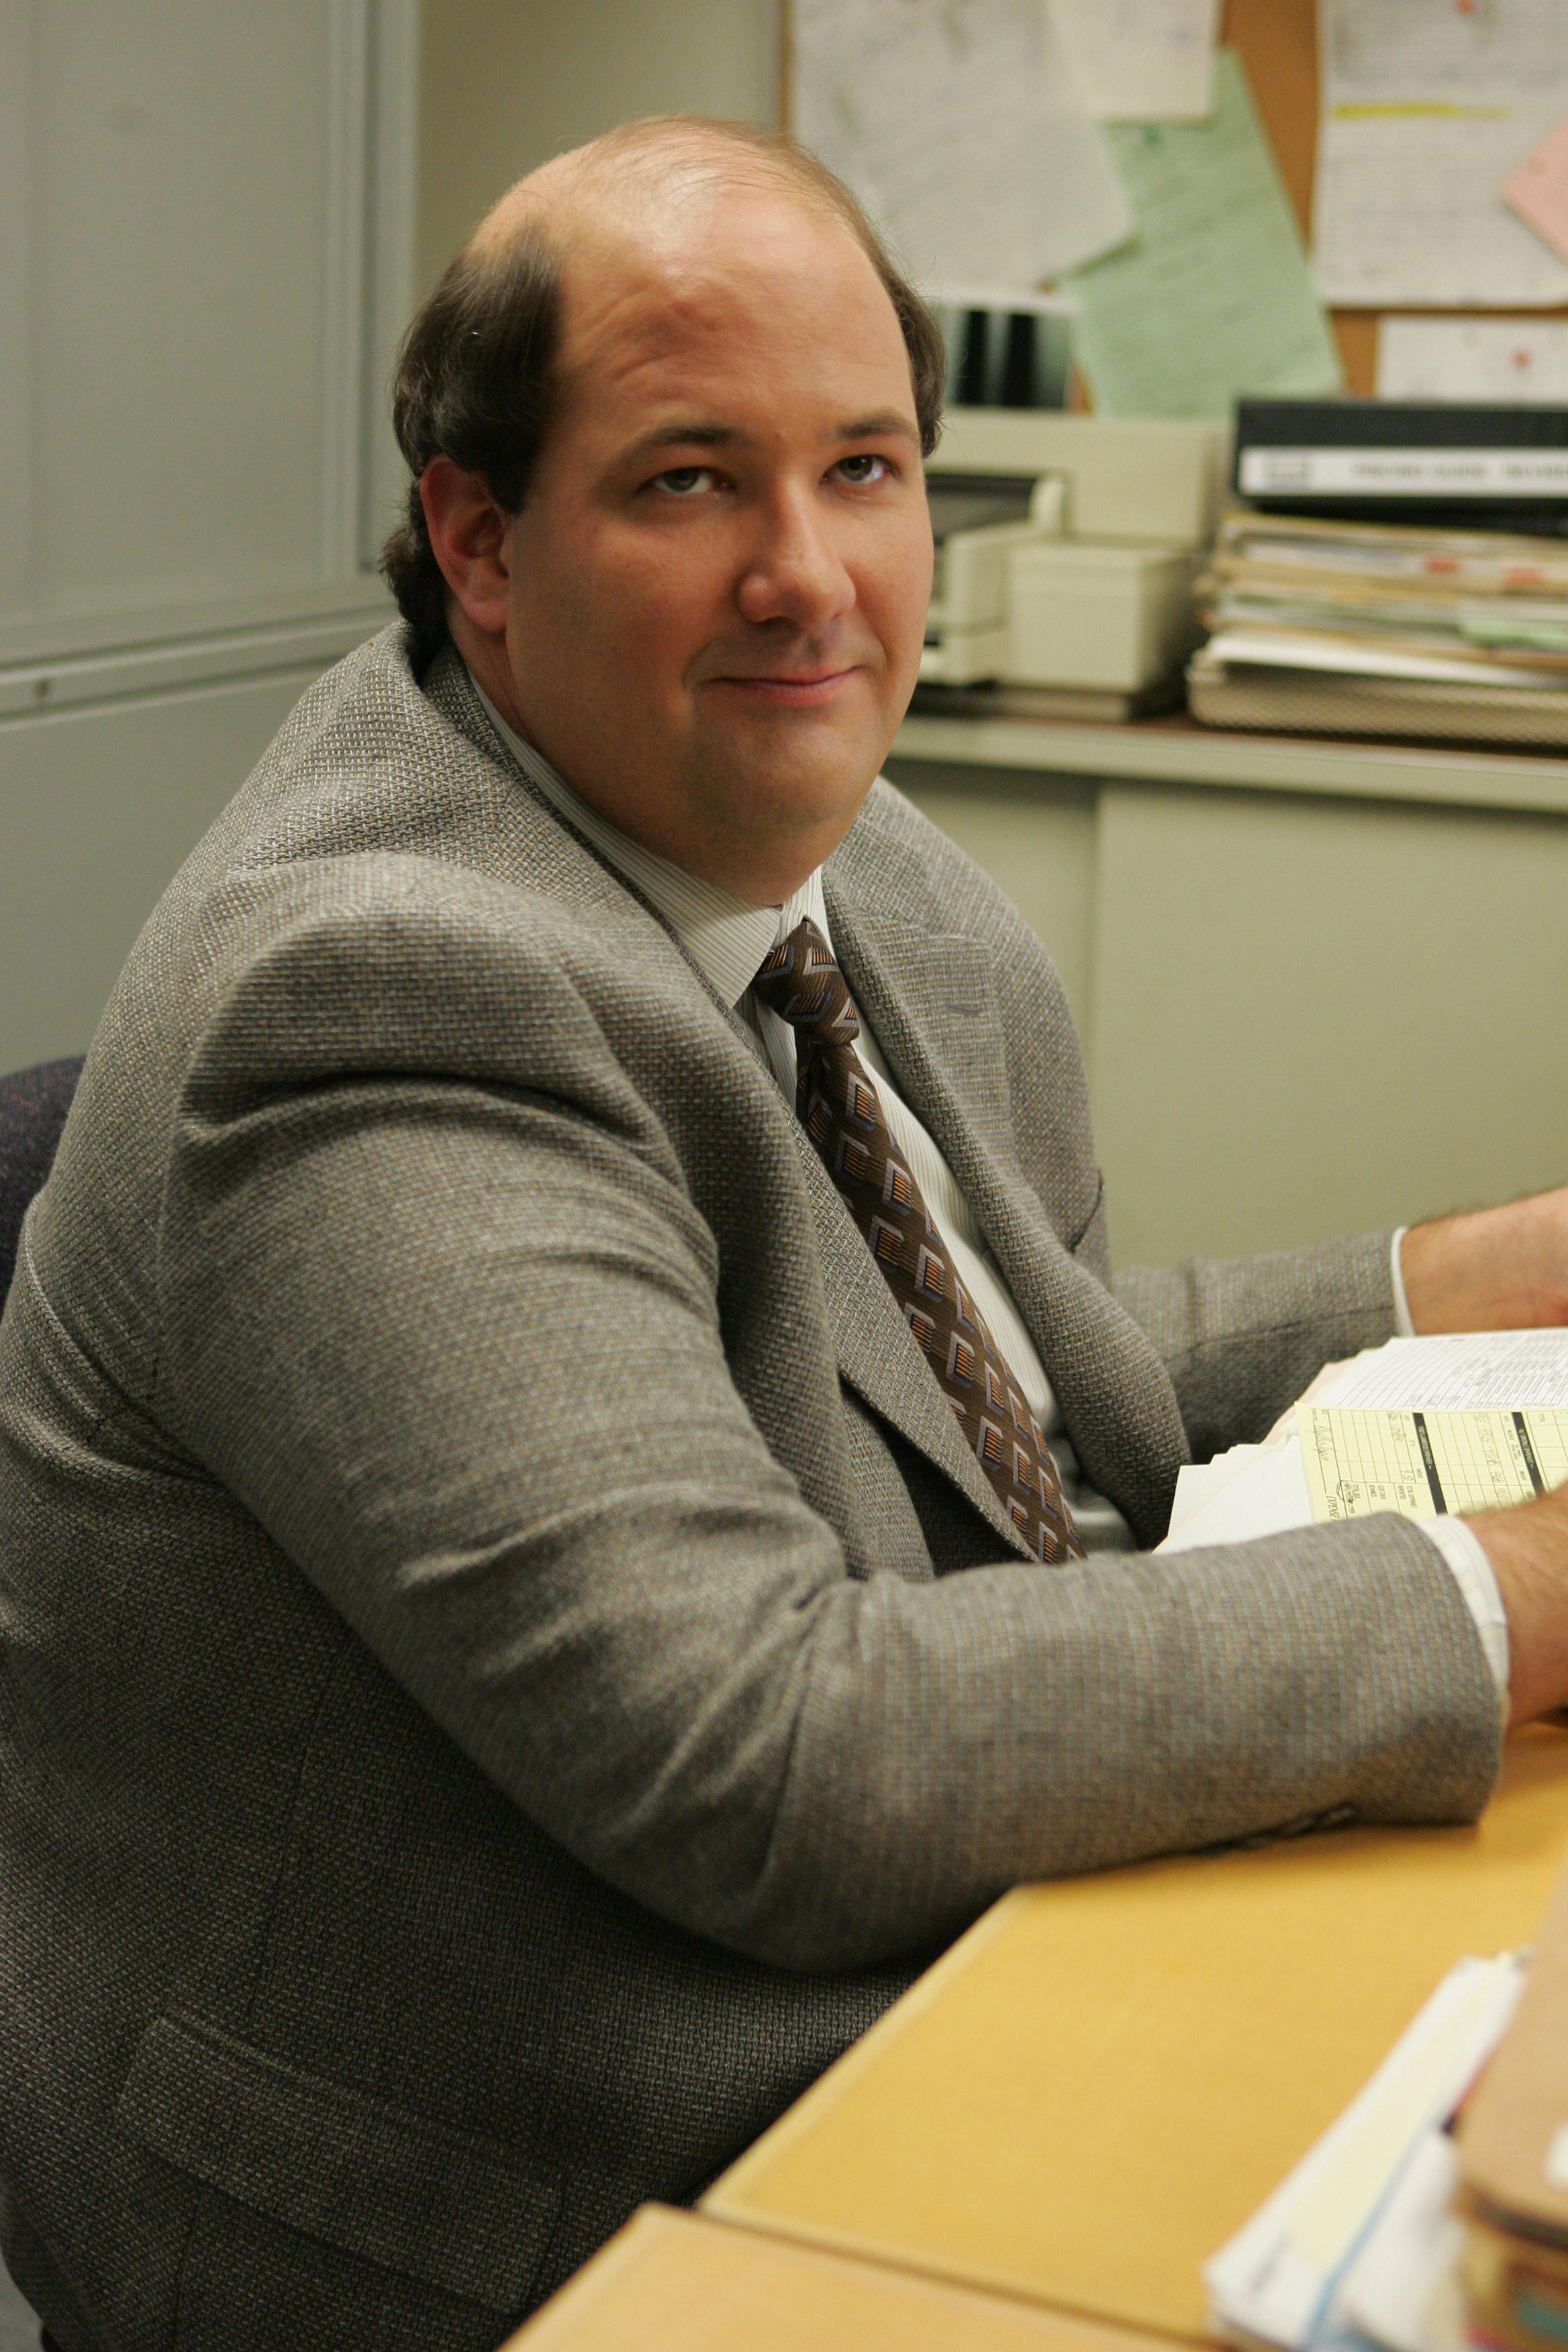 Man in a business suit sitting at a desk in an office environment